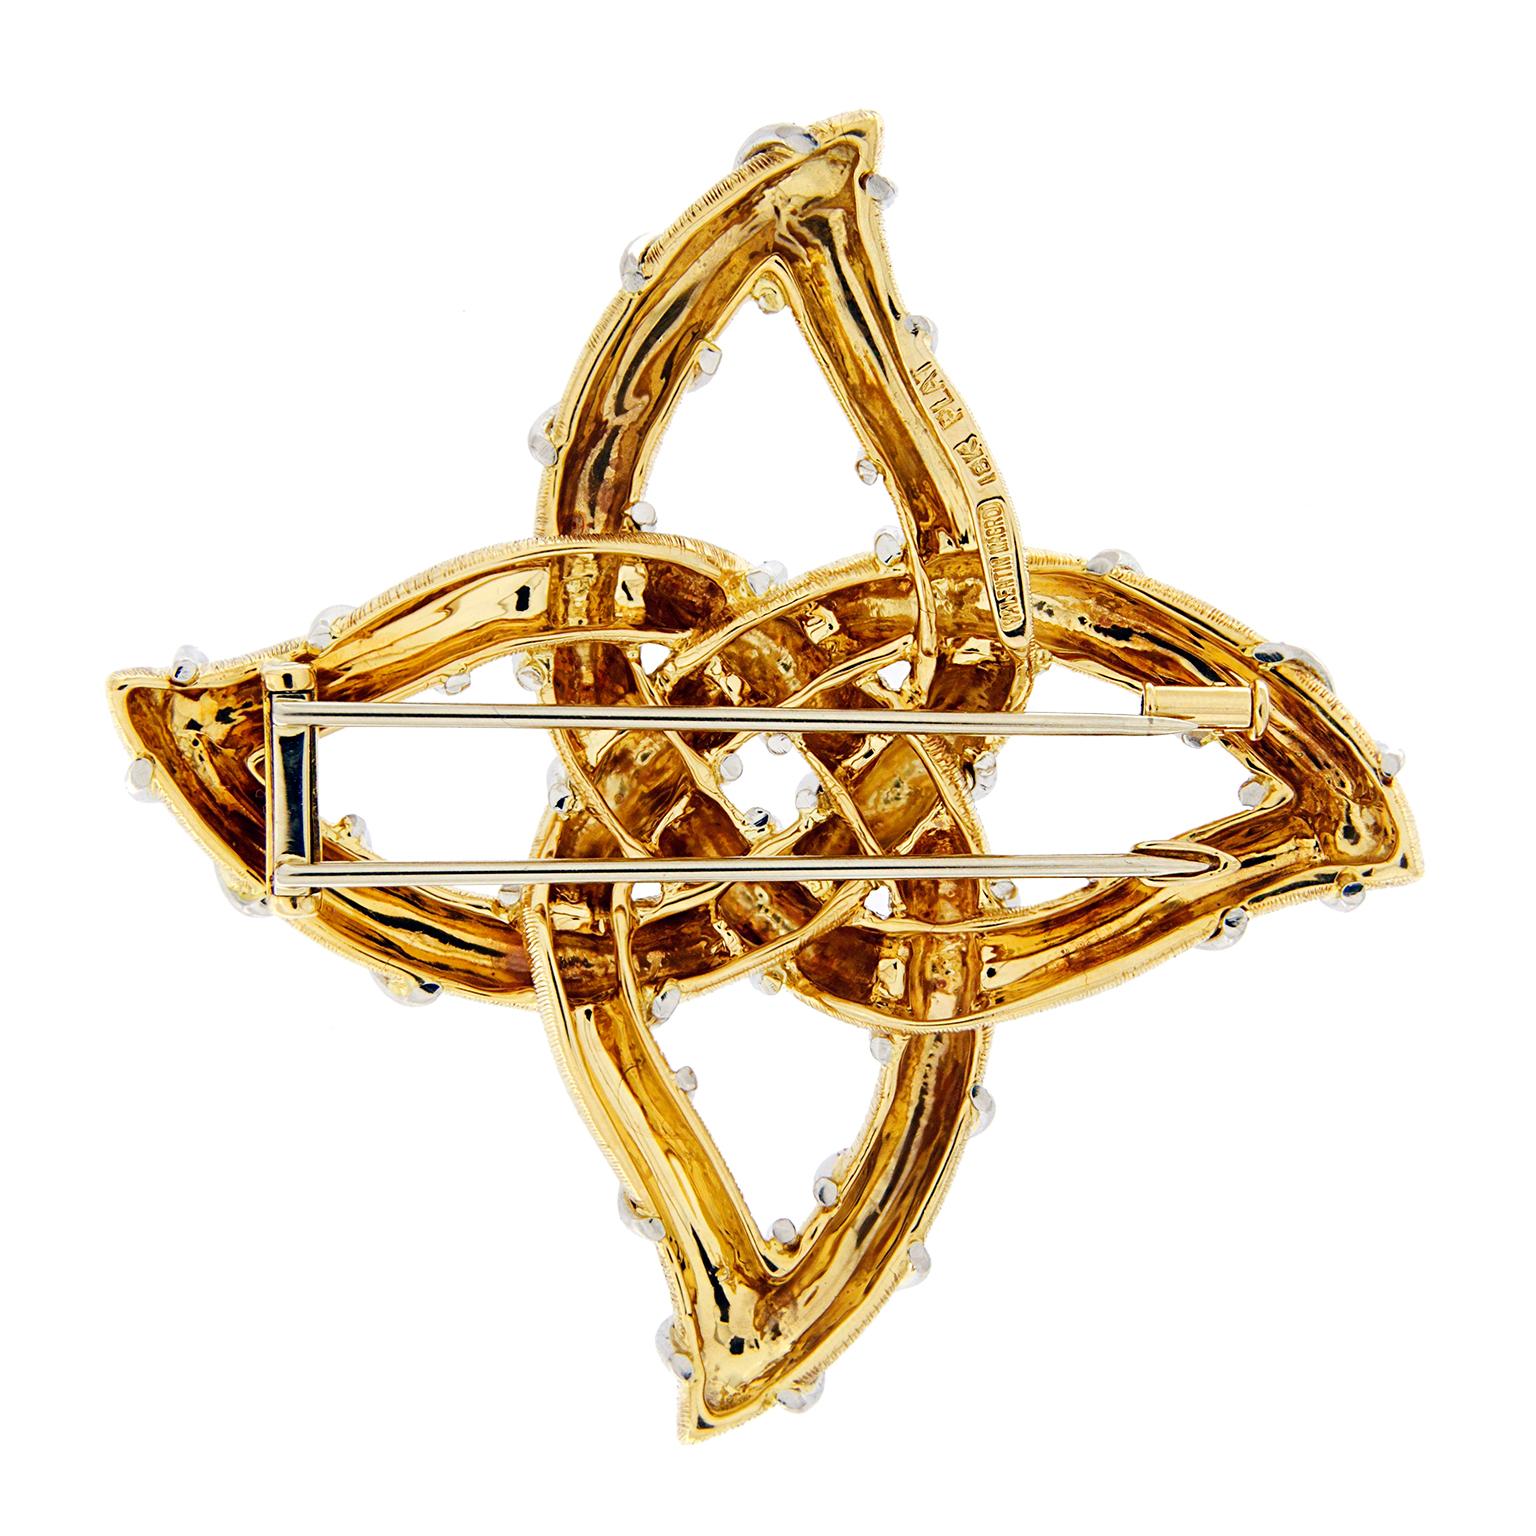 This Valentin Magro Brooch is crafted with 18kt yellow gold textured finish and platinum wire, it is a mix of twin metals designed into a Gothic pictogram. The gold framework reveals four petals attached to a semi-circular pod at the center. The